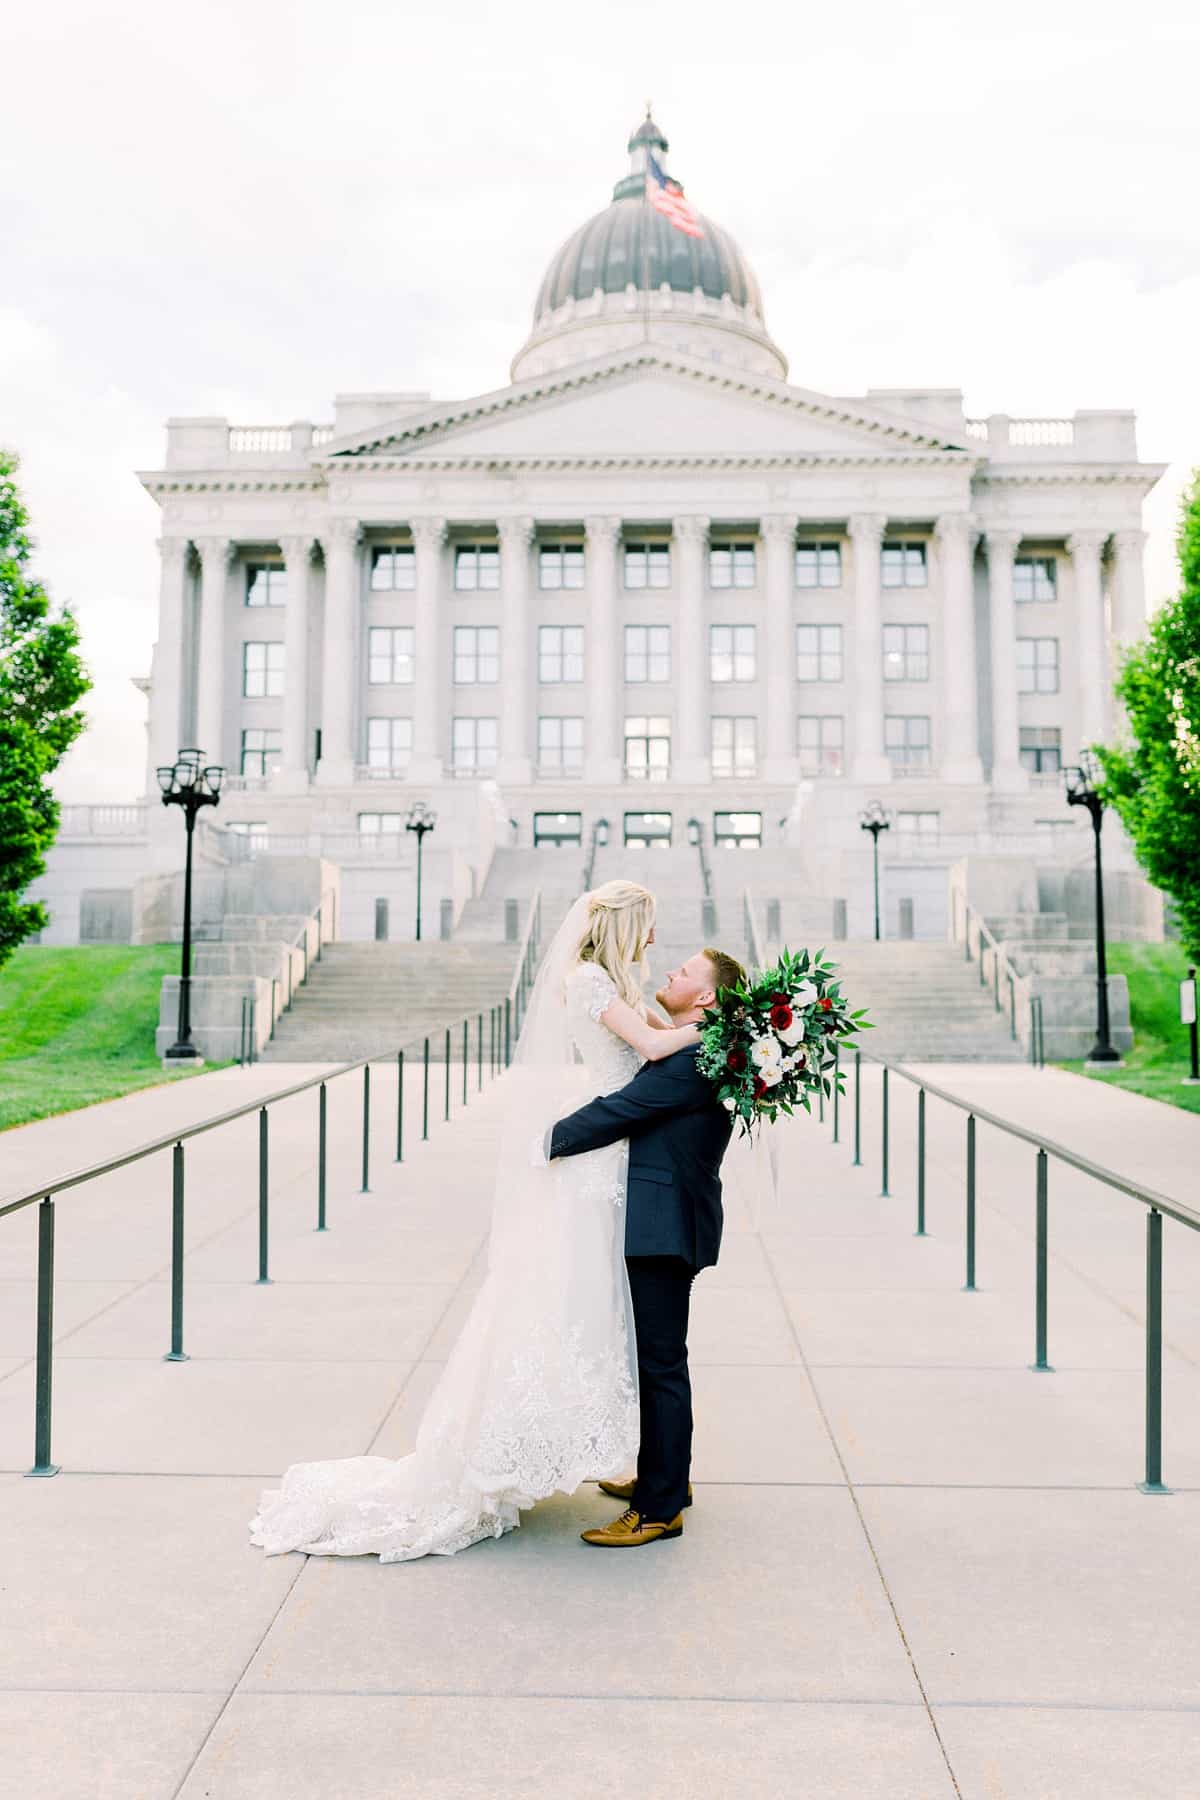 Bride and groom at Utah State Capitol Building, spring film wedding photography